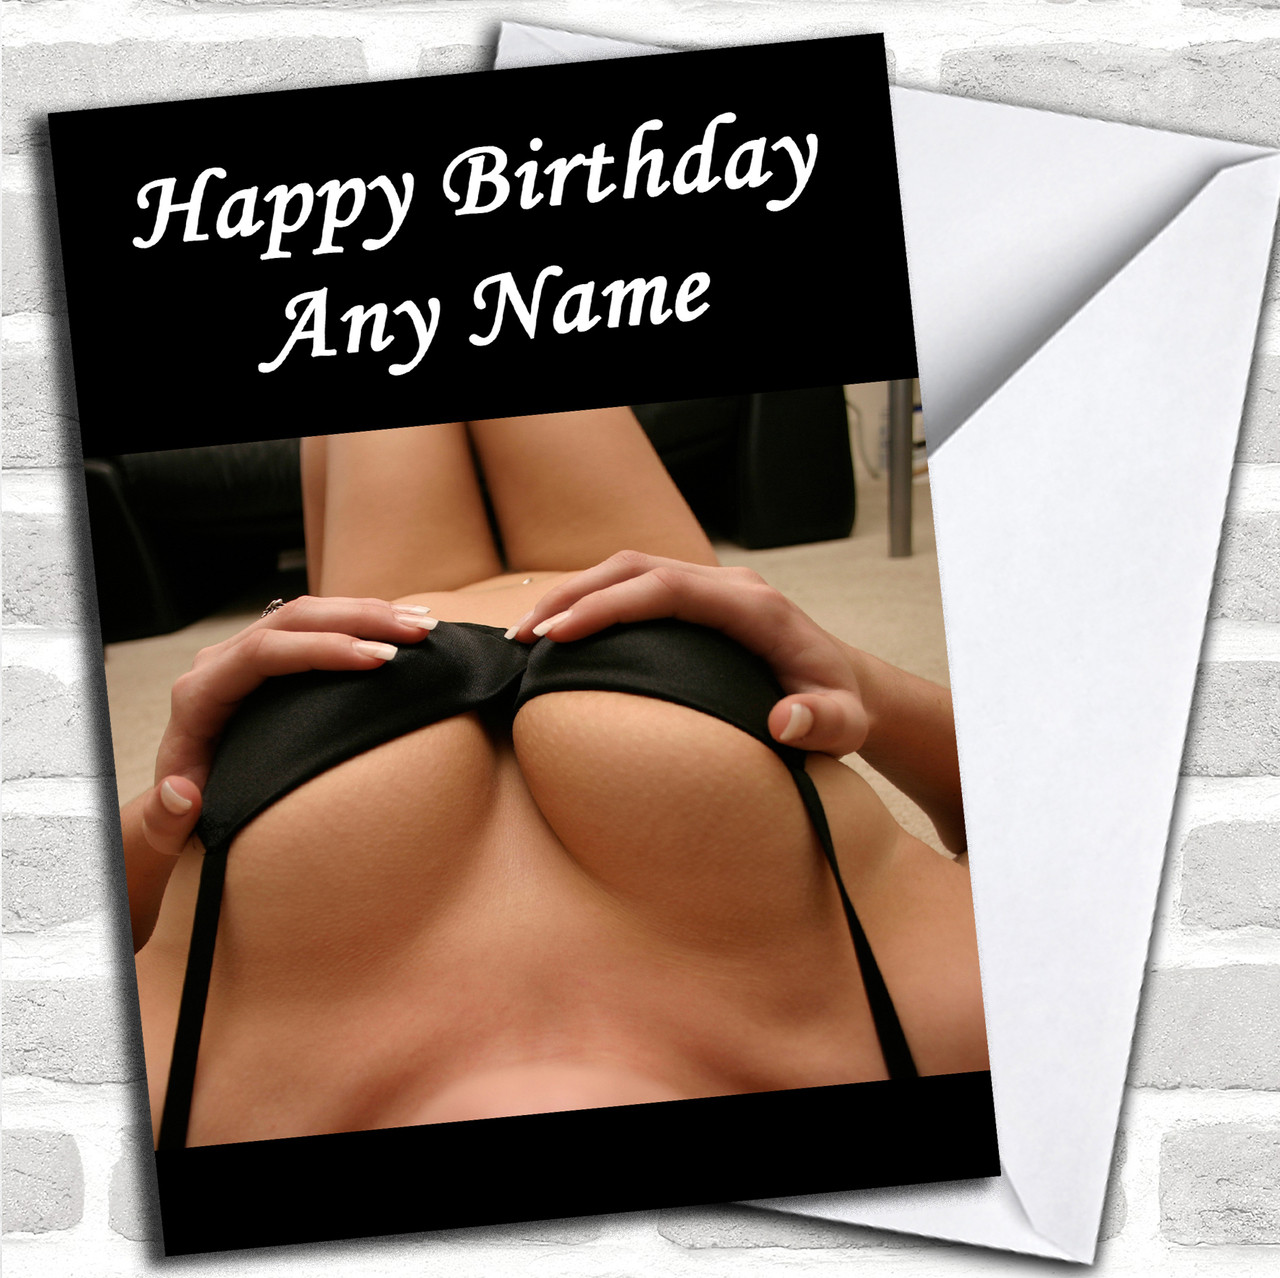 cami murphy recommends Sexy Female Happy Birthday